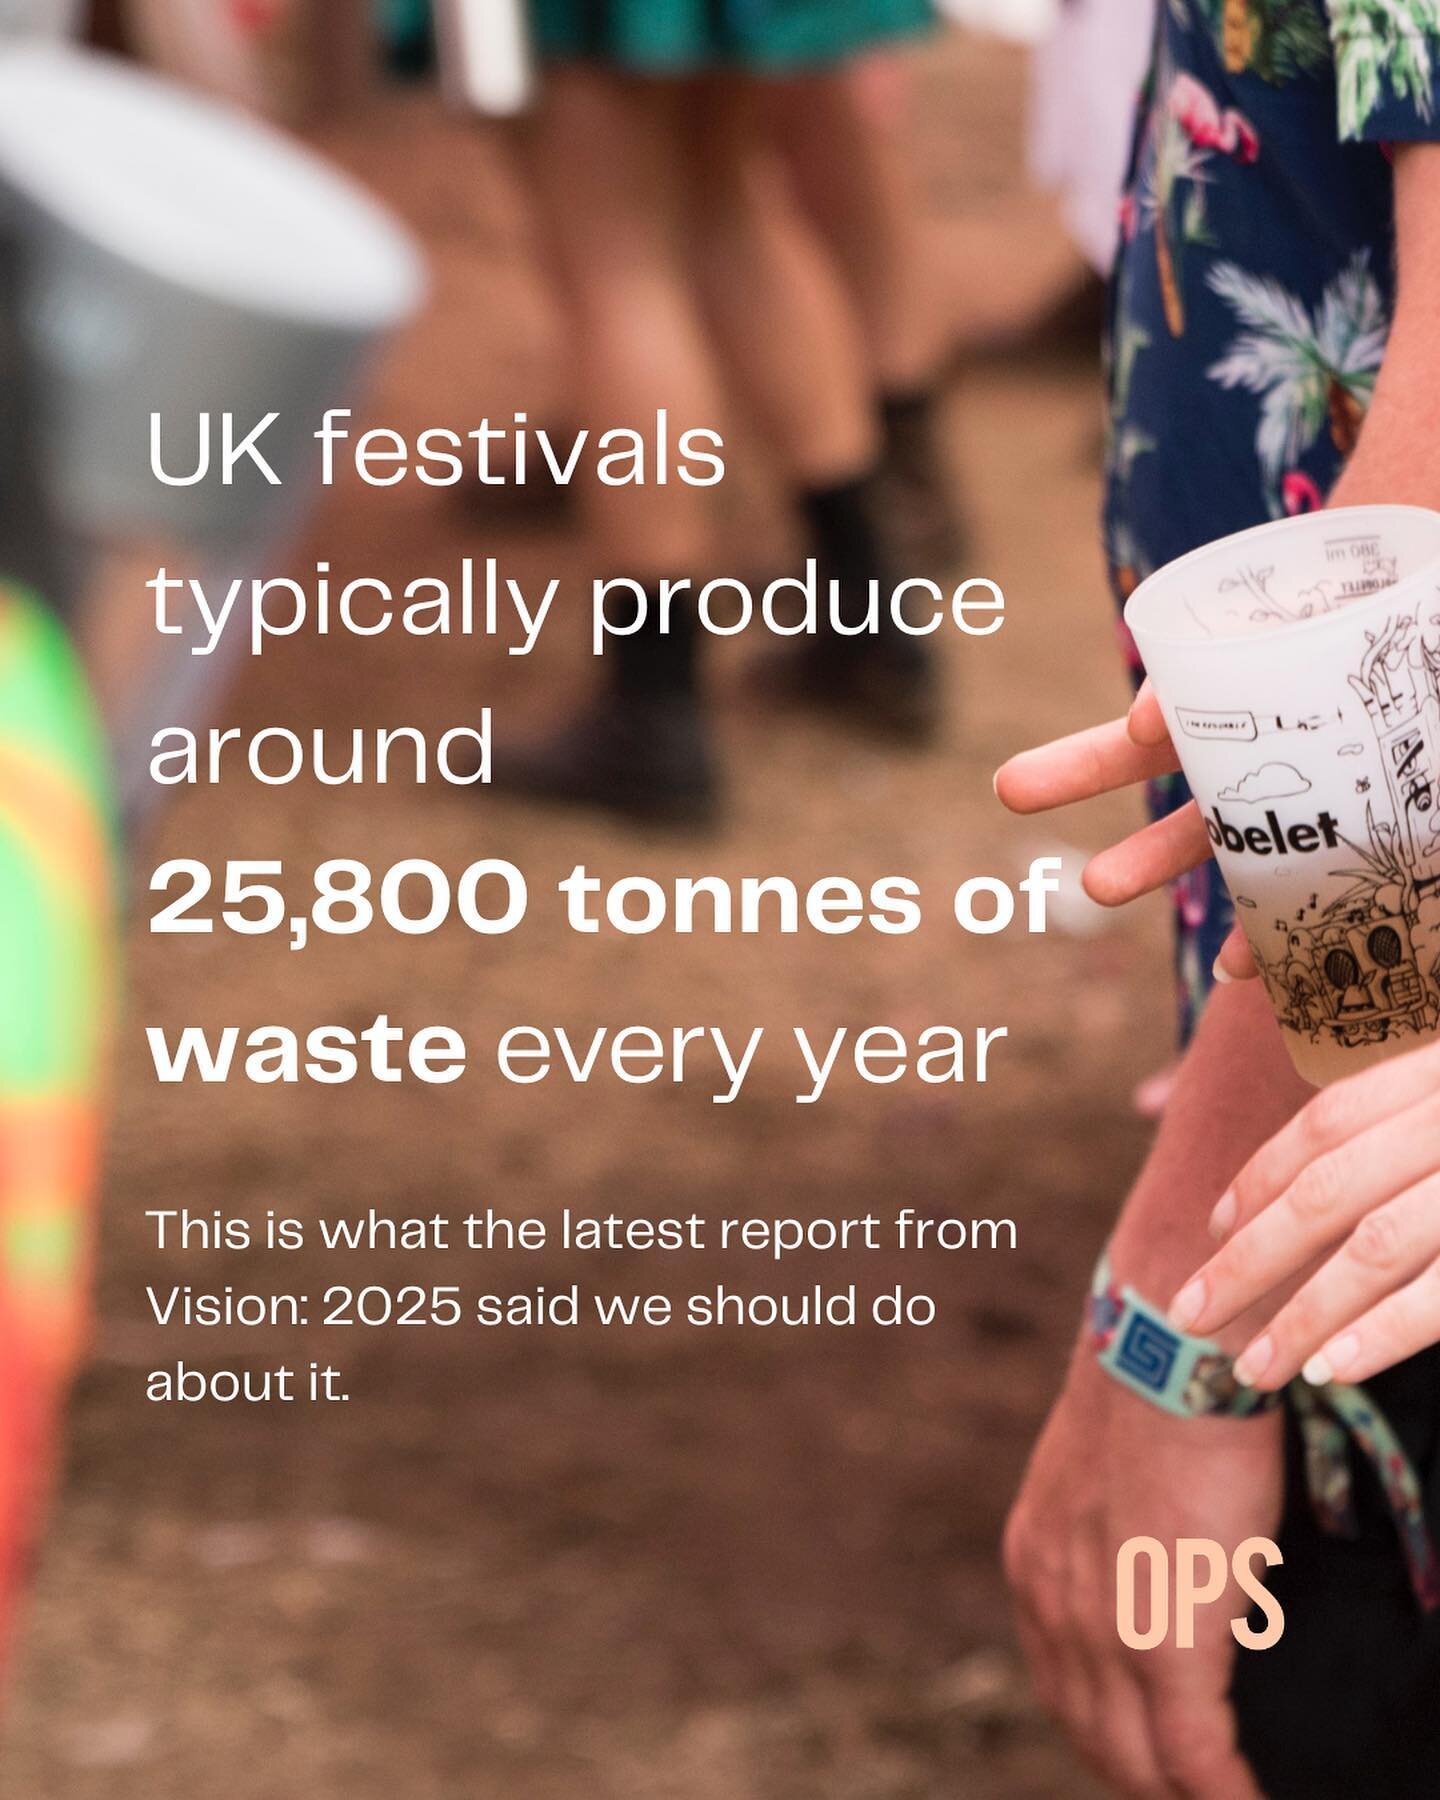 Today is the first ever International Day of Zero Waste, after it was declared by the United Nations in December ♻️

To promote sustainable consumption and production patterns, we thought we'd share some festival-focused zero waste findings from Visi